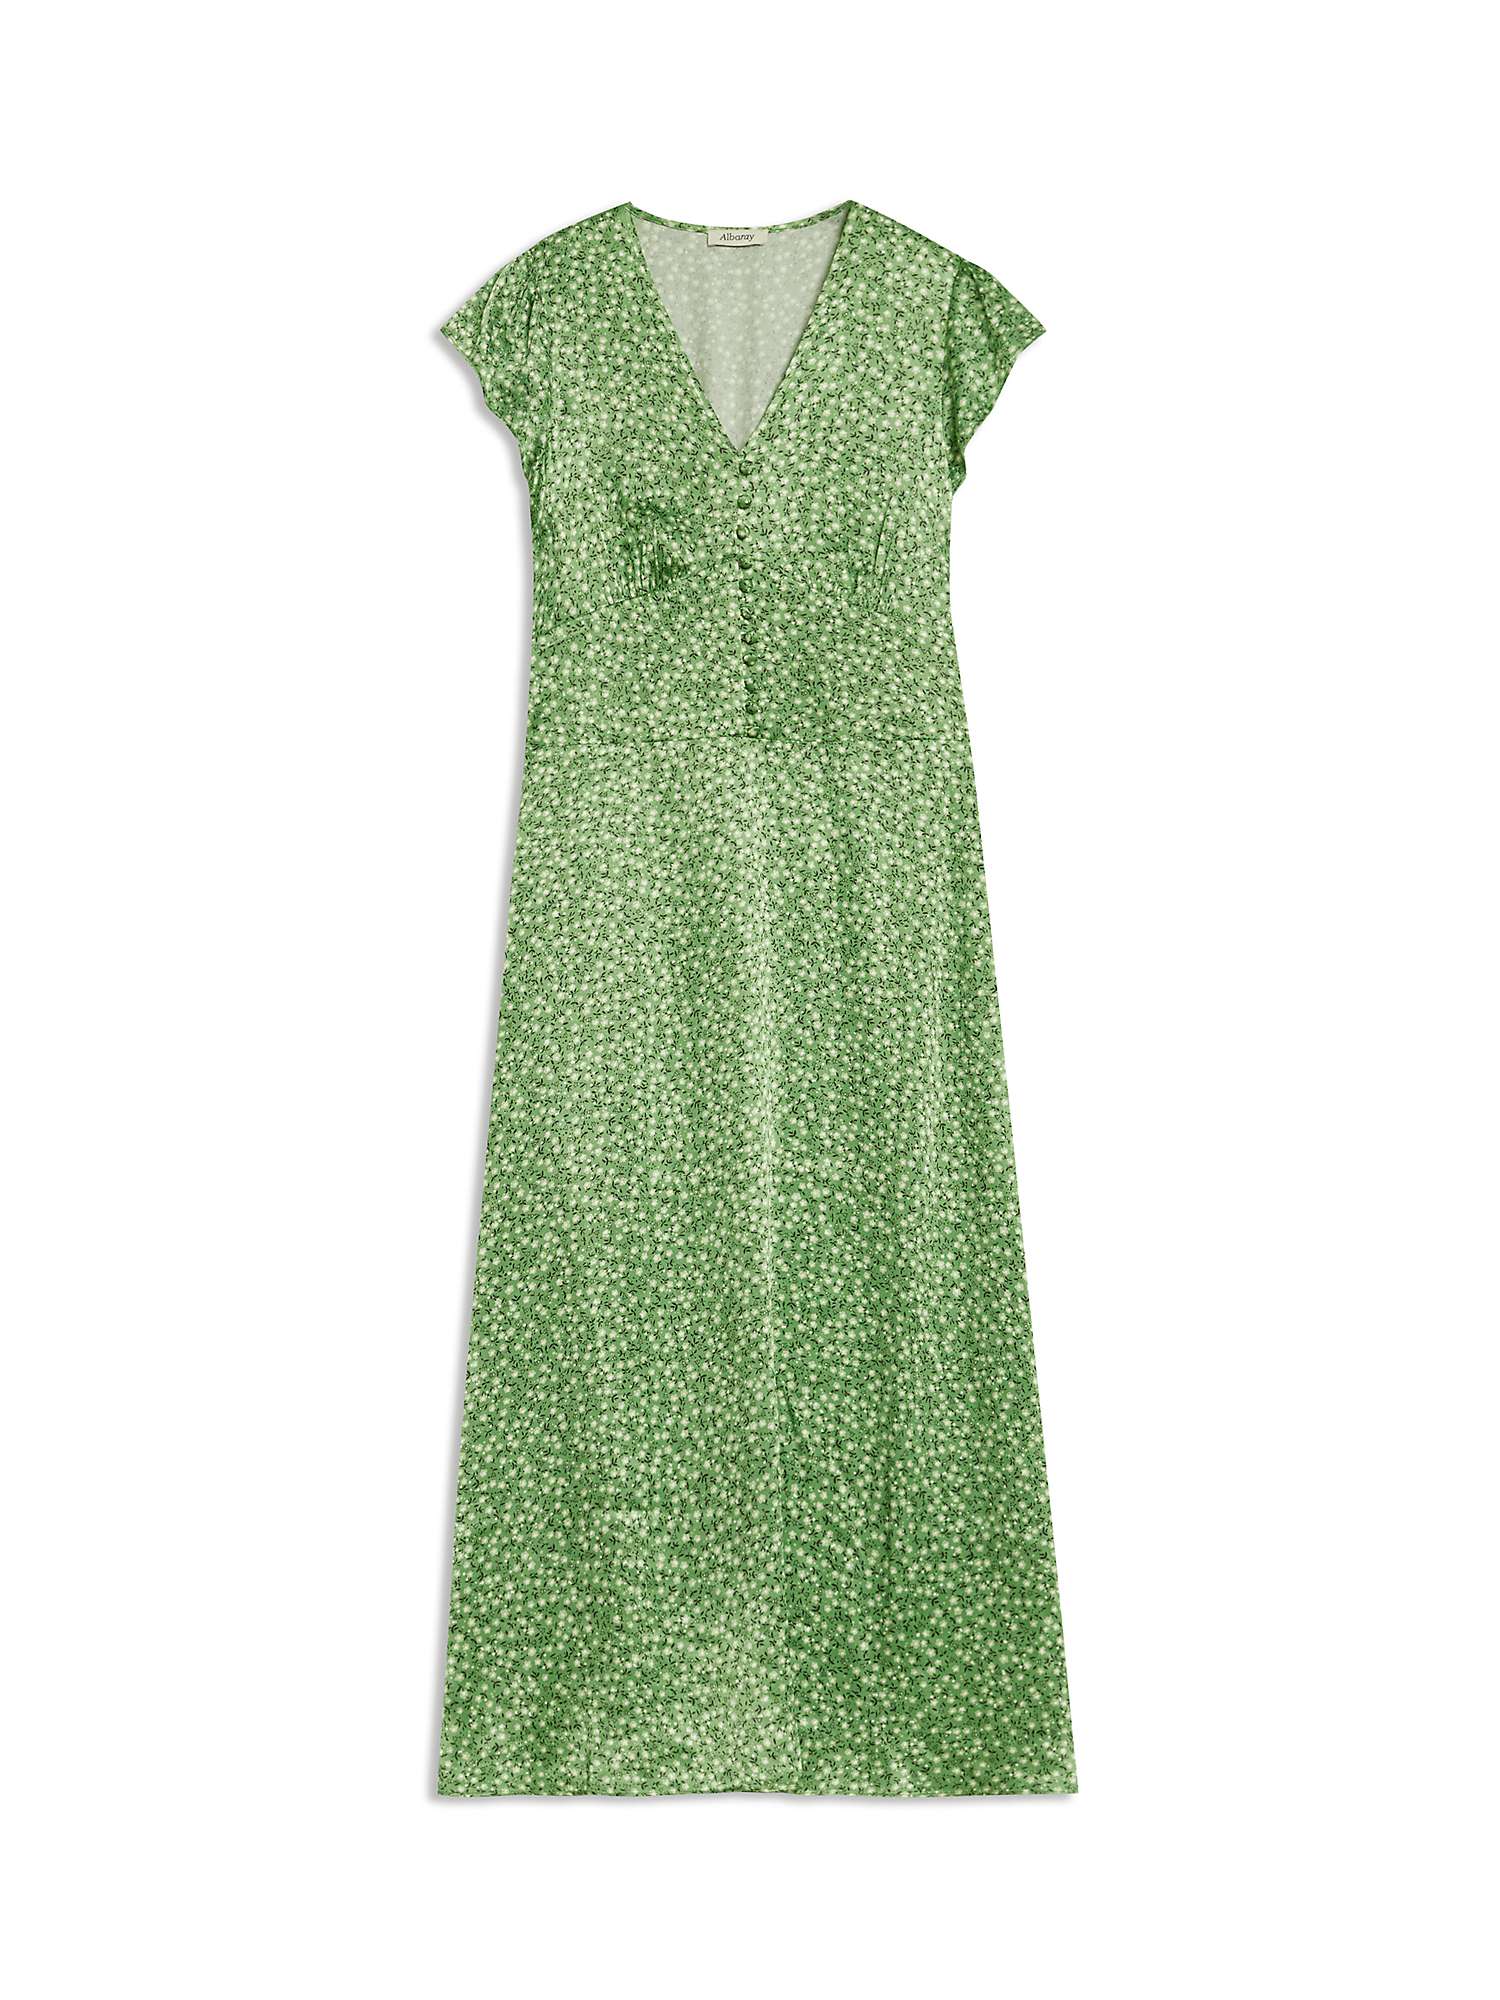 Buy Albaray Forget Me Knot Dress, Green Online at johnlewis.com